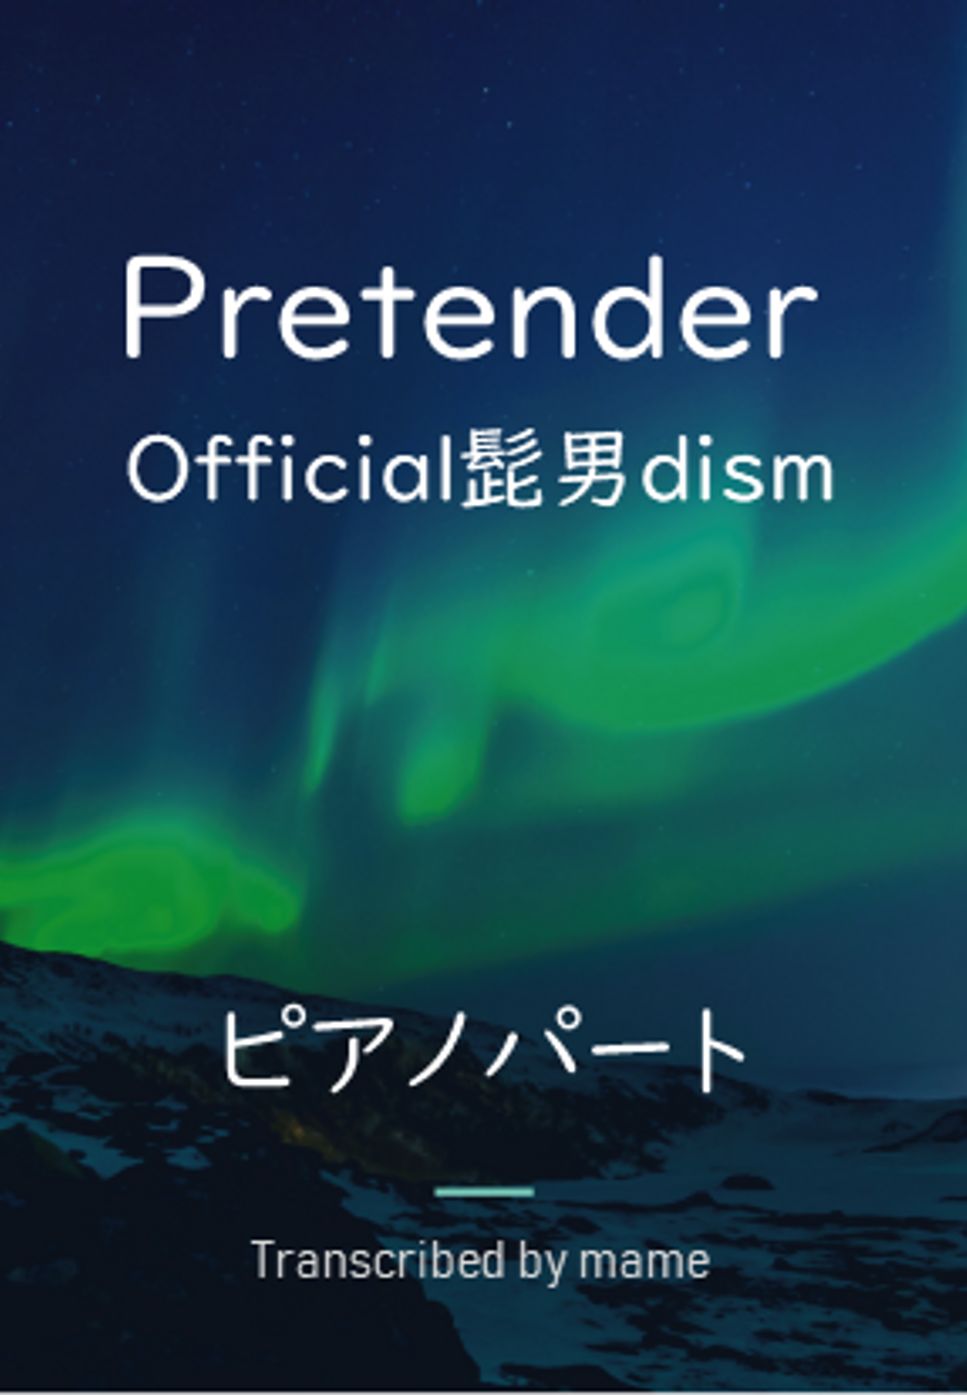 Official髭男dism - Pretender (ピアノパート) by mame